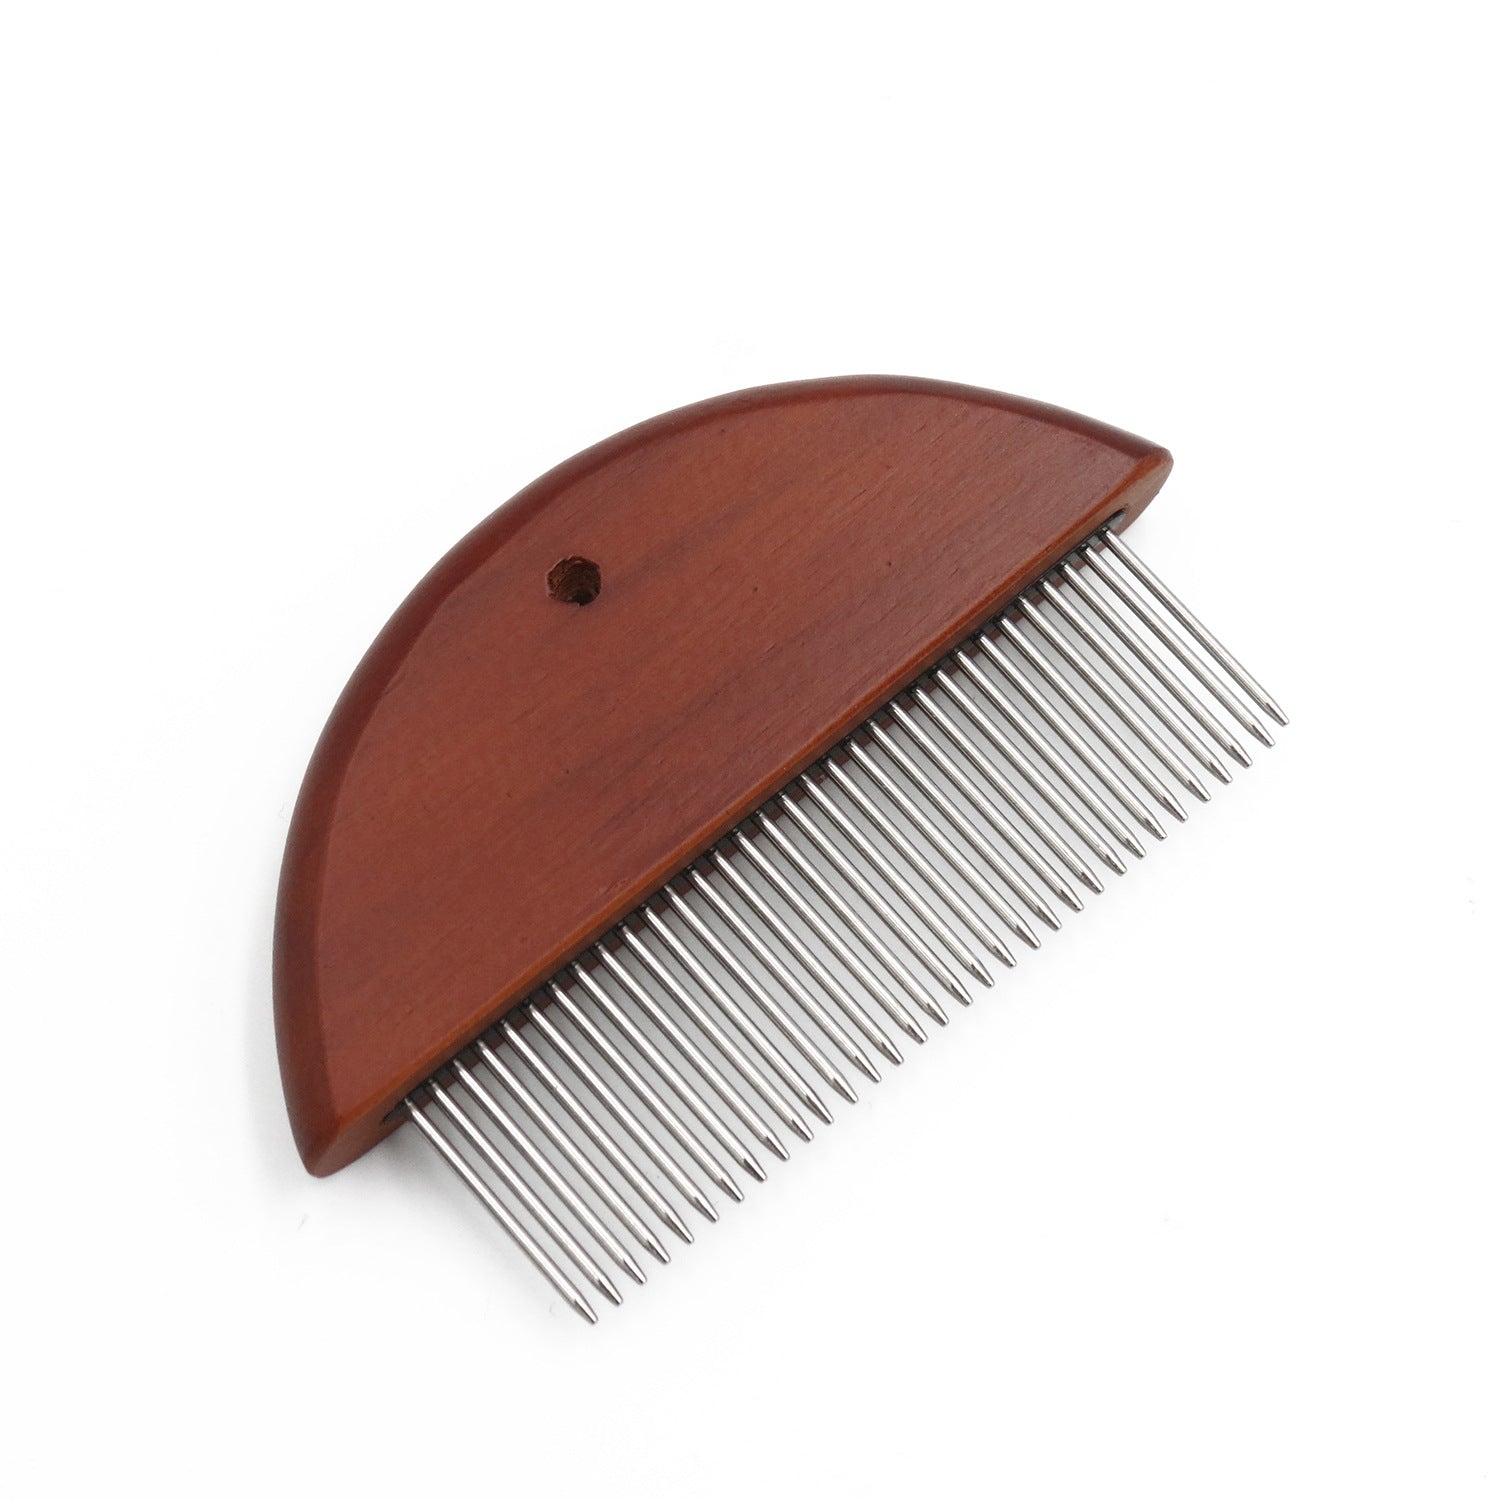 Pet Knotted Comb For Dogs And Dogs Stainless Steel Row Comb For Cats And Dogs Flea Comb With Wooden Handle